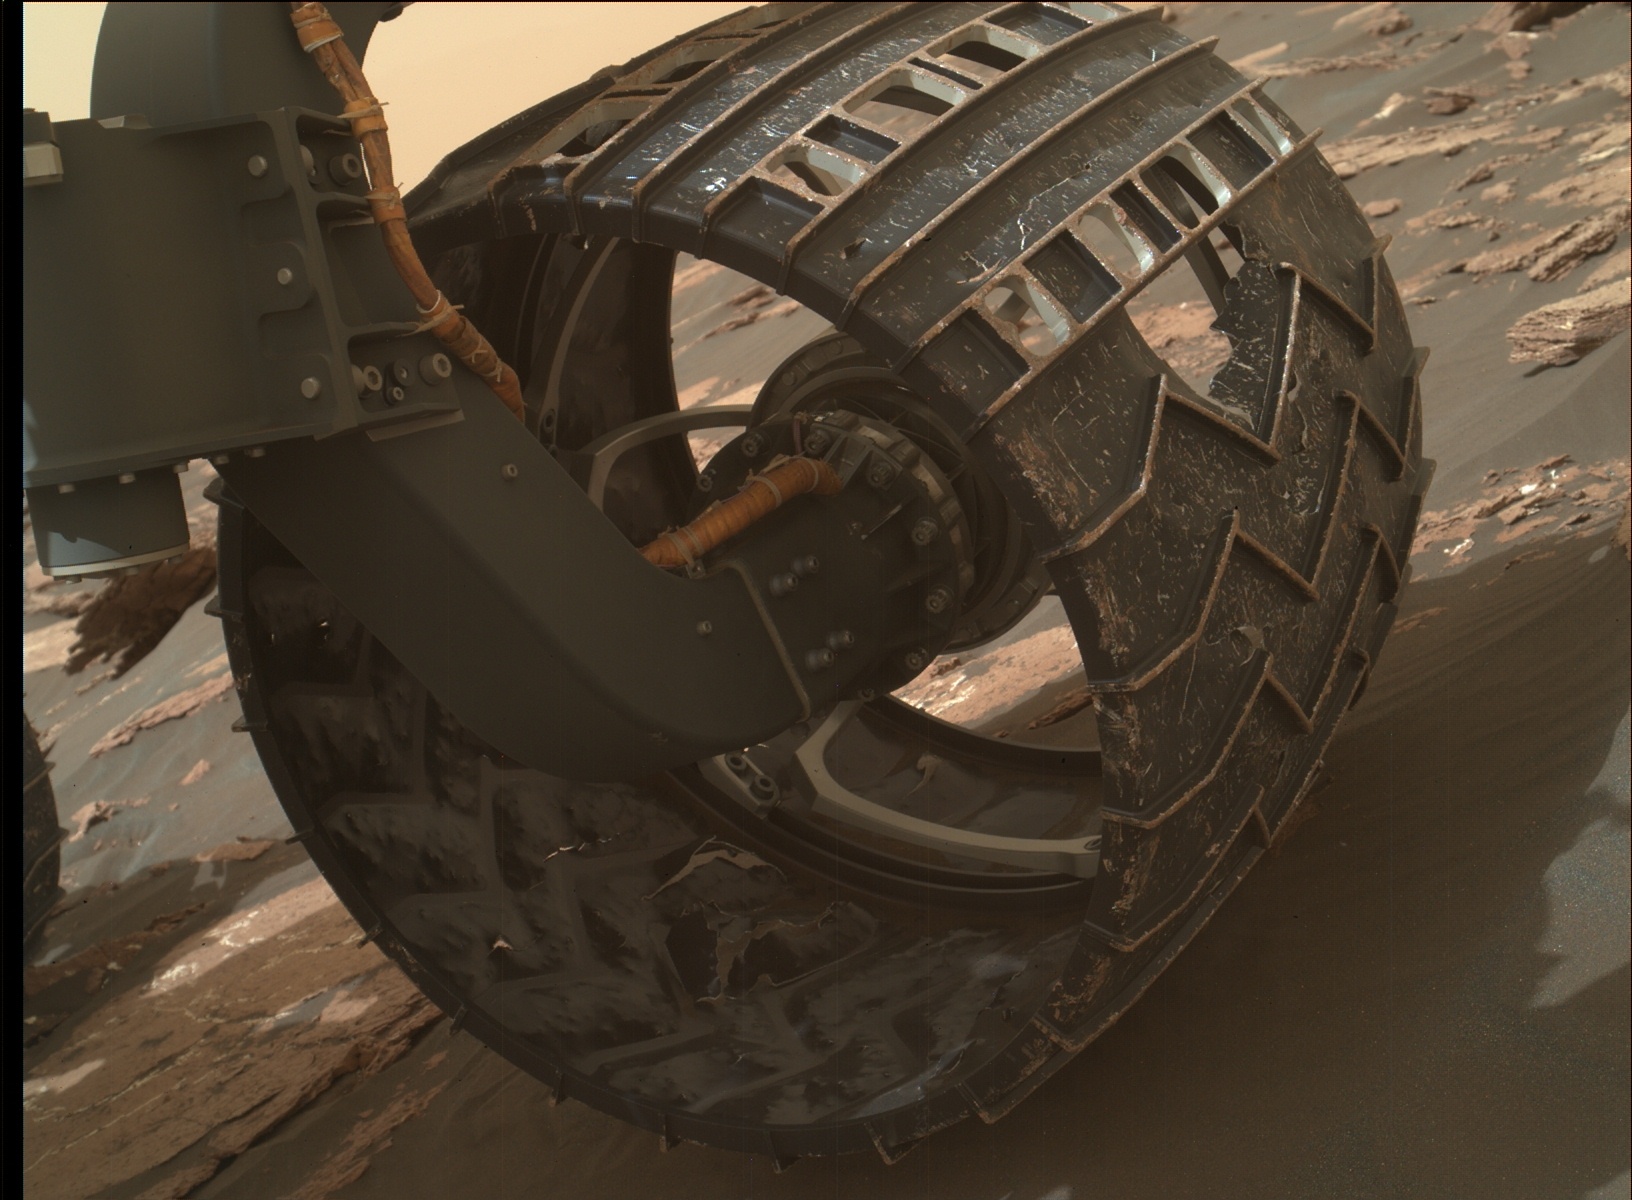 Nasa's Mars rover Curiosity acquired this image using its Mars Hand Lens Imager (MAHLI) on Sol 1641